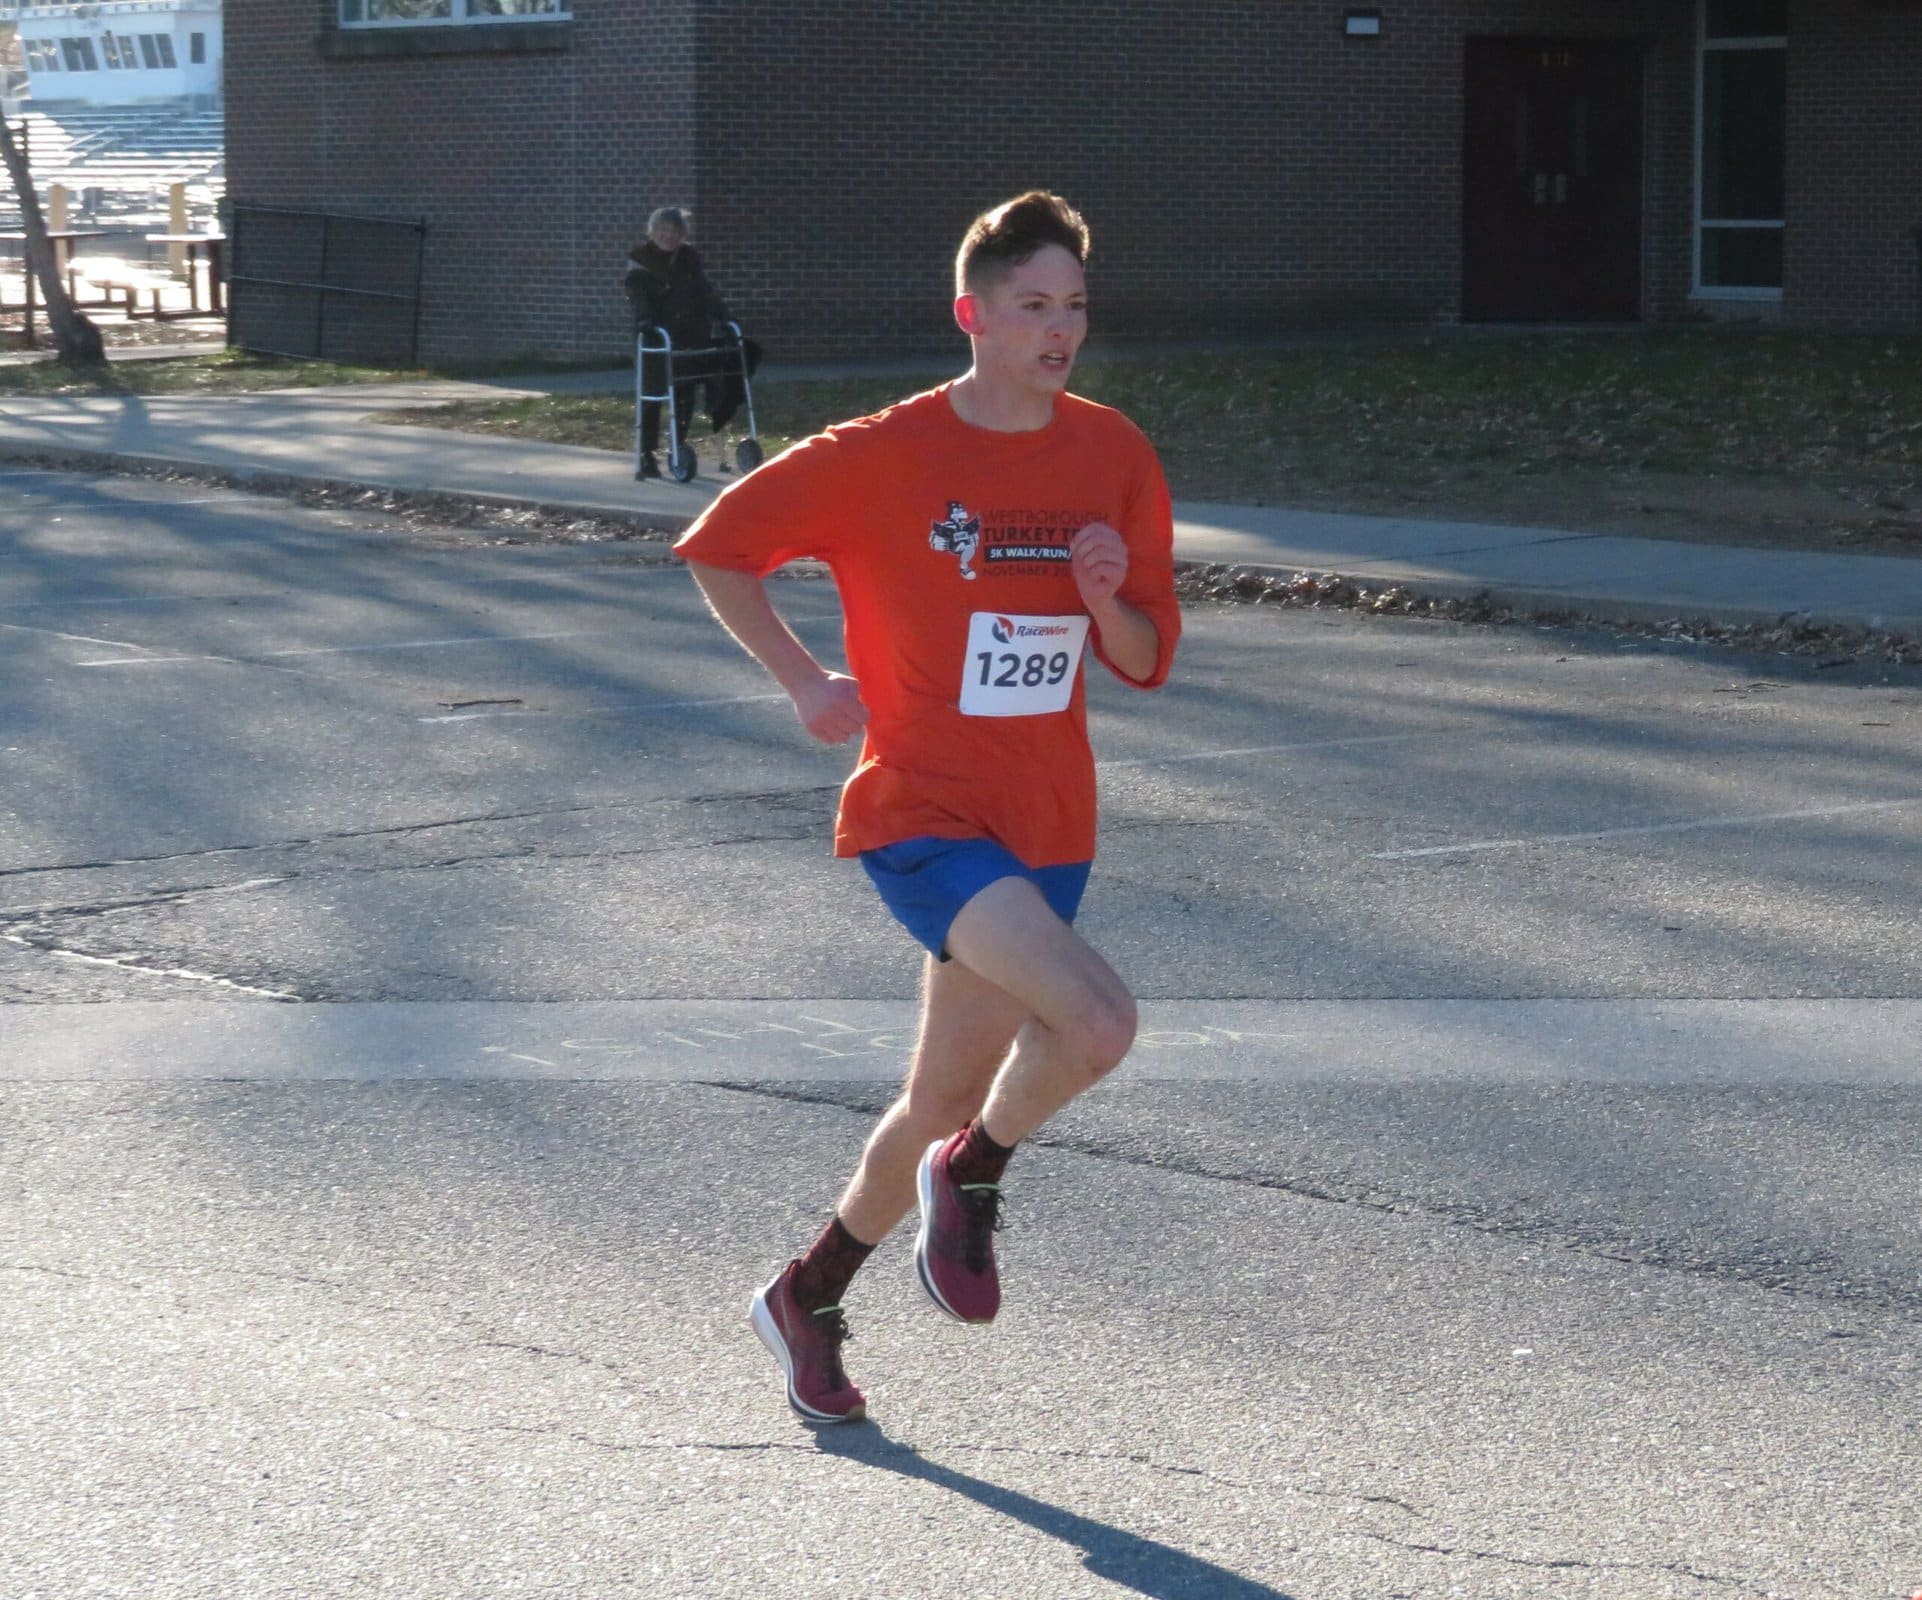 Turkey Trotters hit the road in Westborough